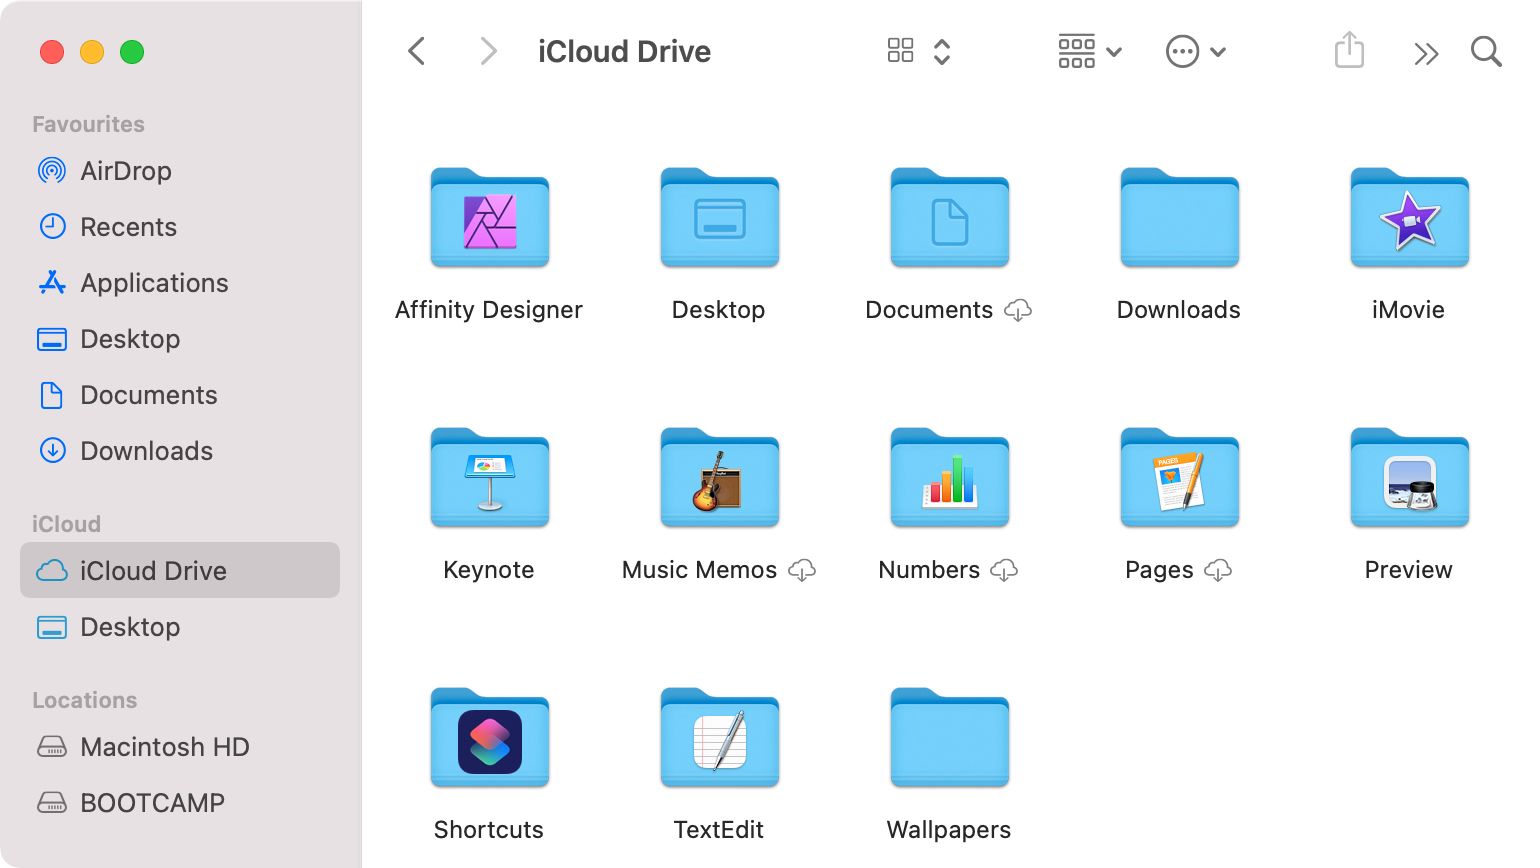 iCloud Drive icons in Finder on Mac